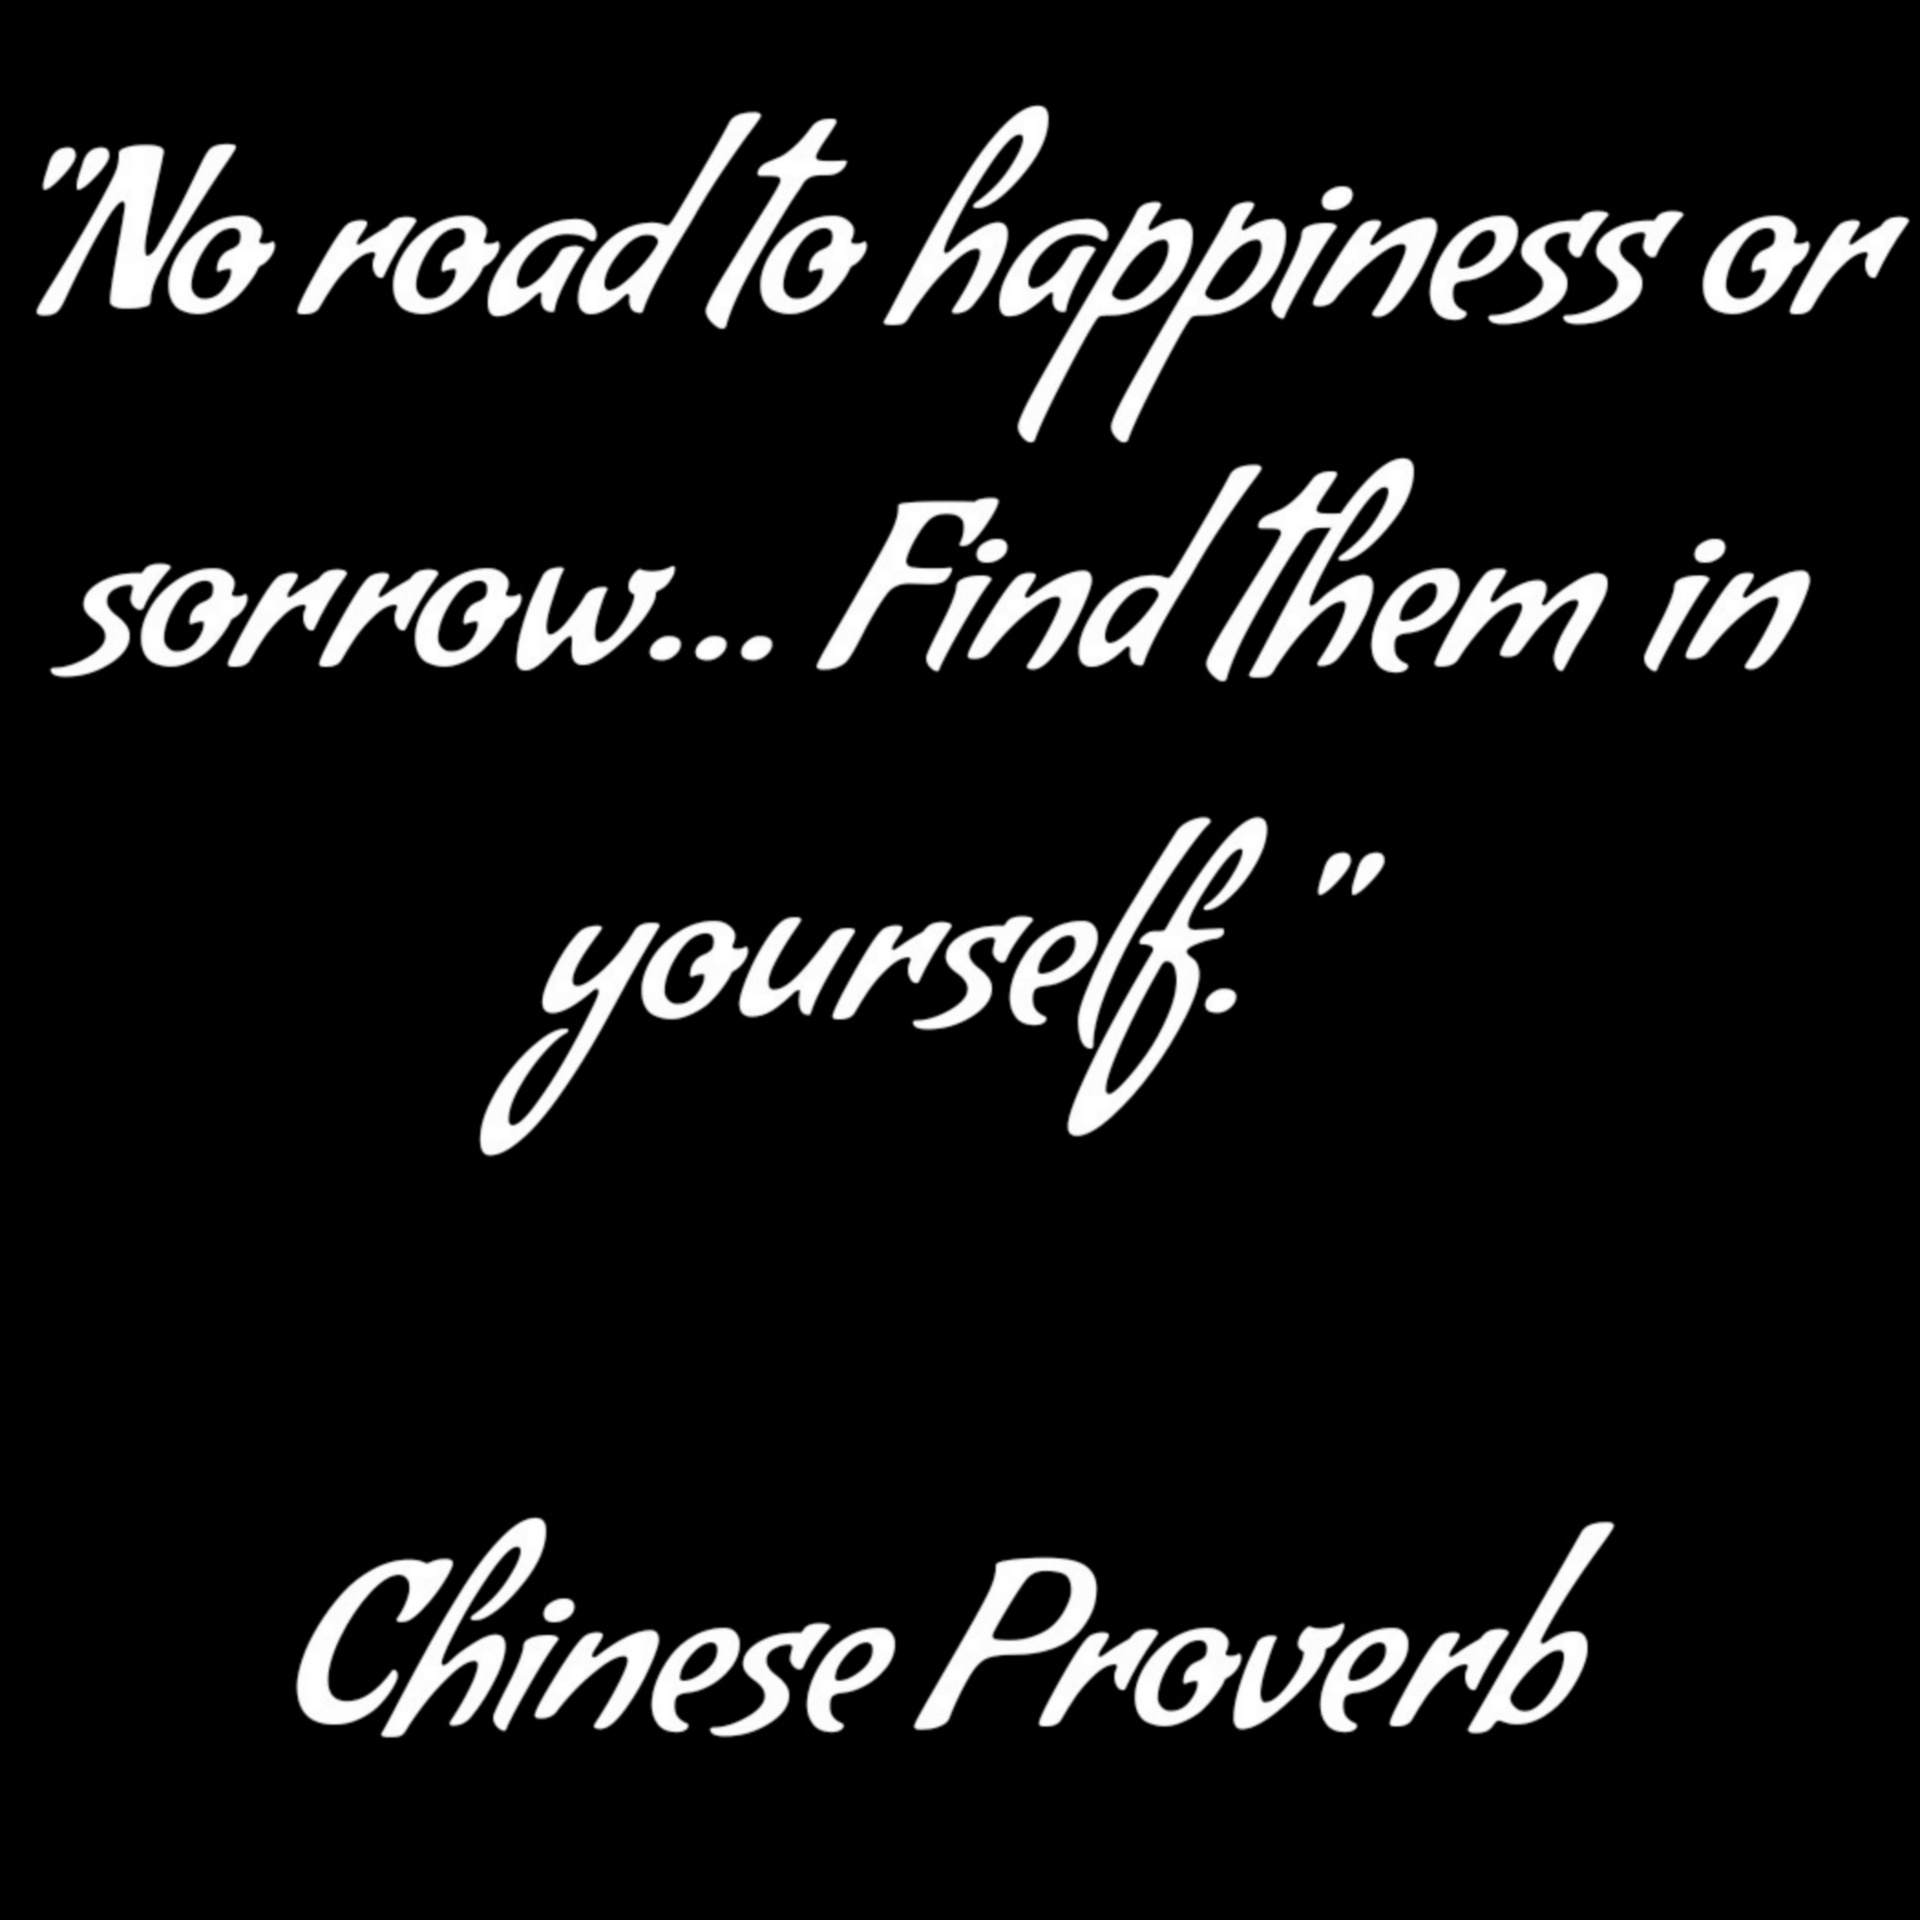 Chinese Proverb On Happiness